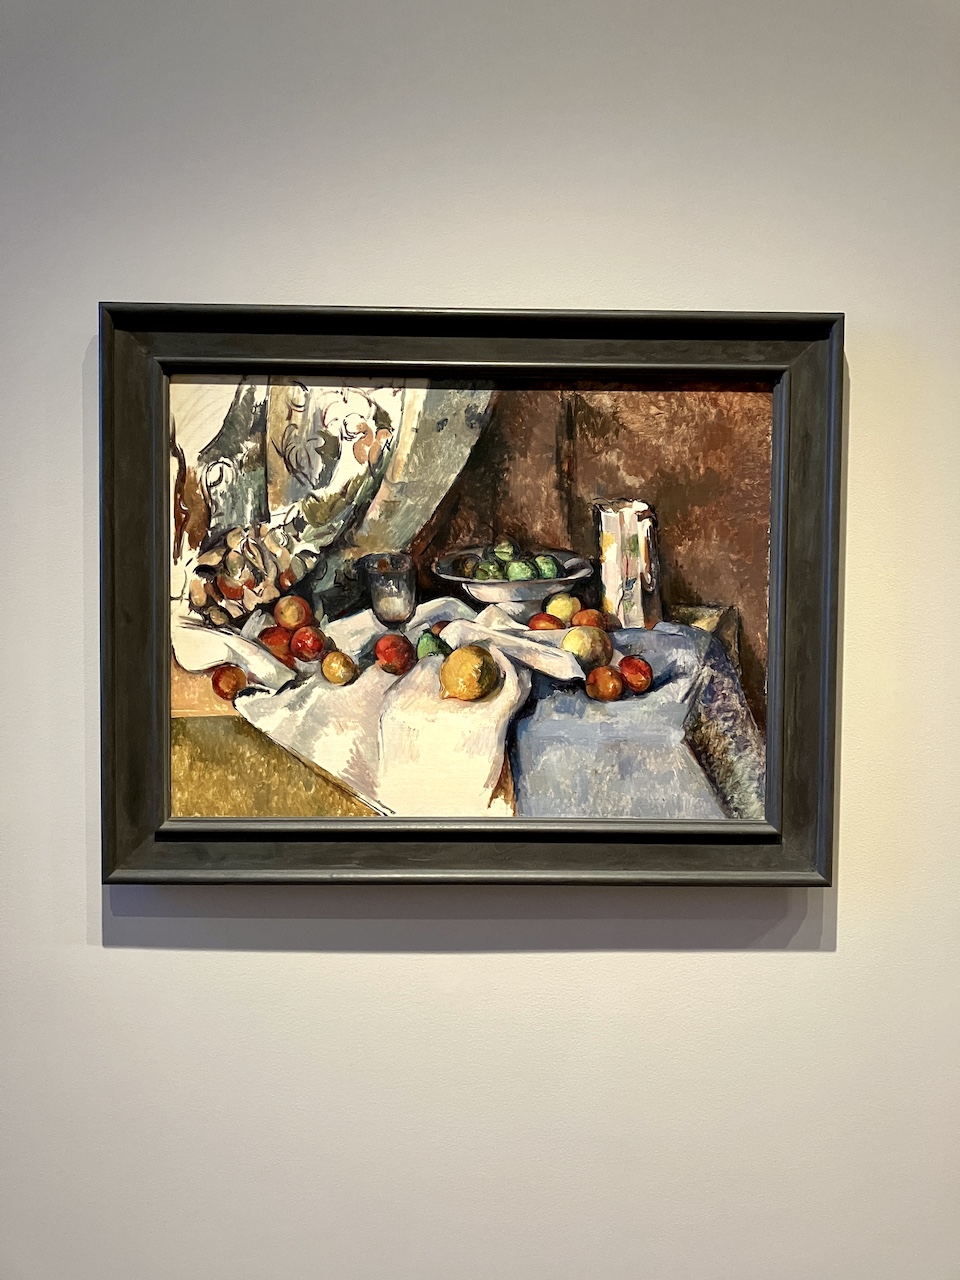 Paul Cézanne's Still Life With Apples at MoMA, Museum of Modern Art, New York | photo By Kerwin